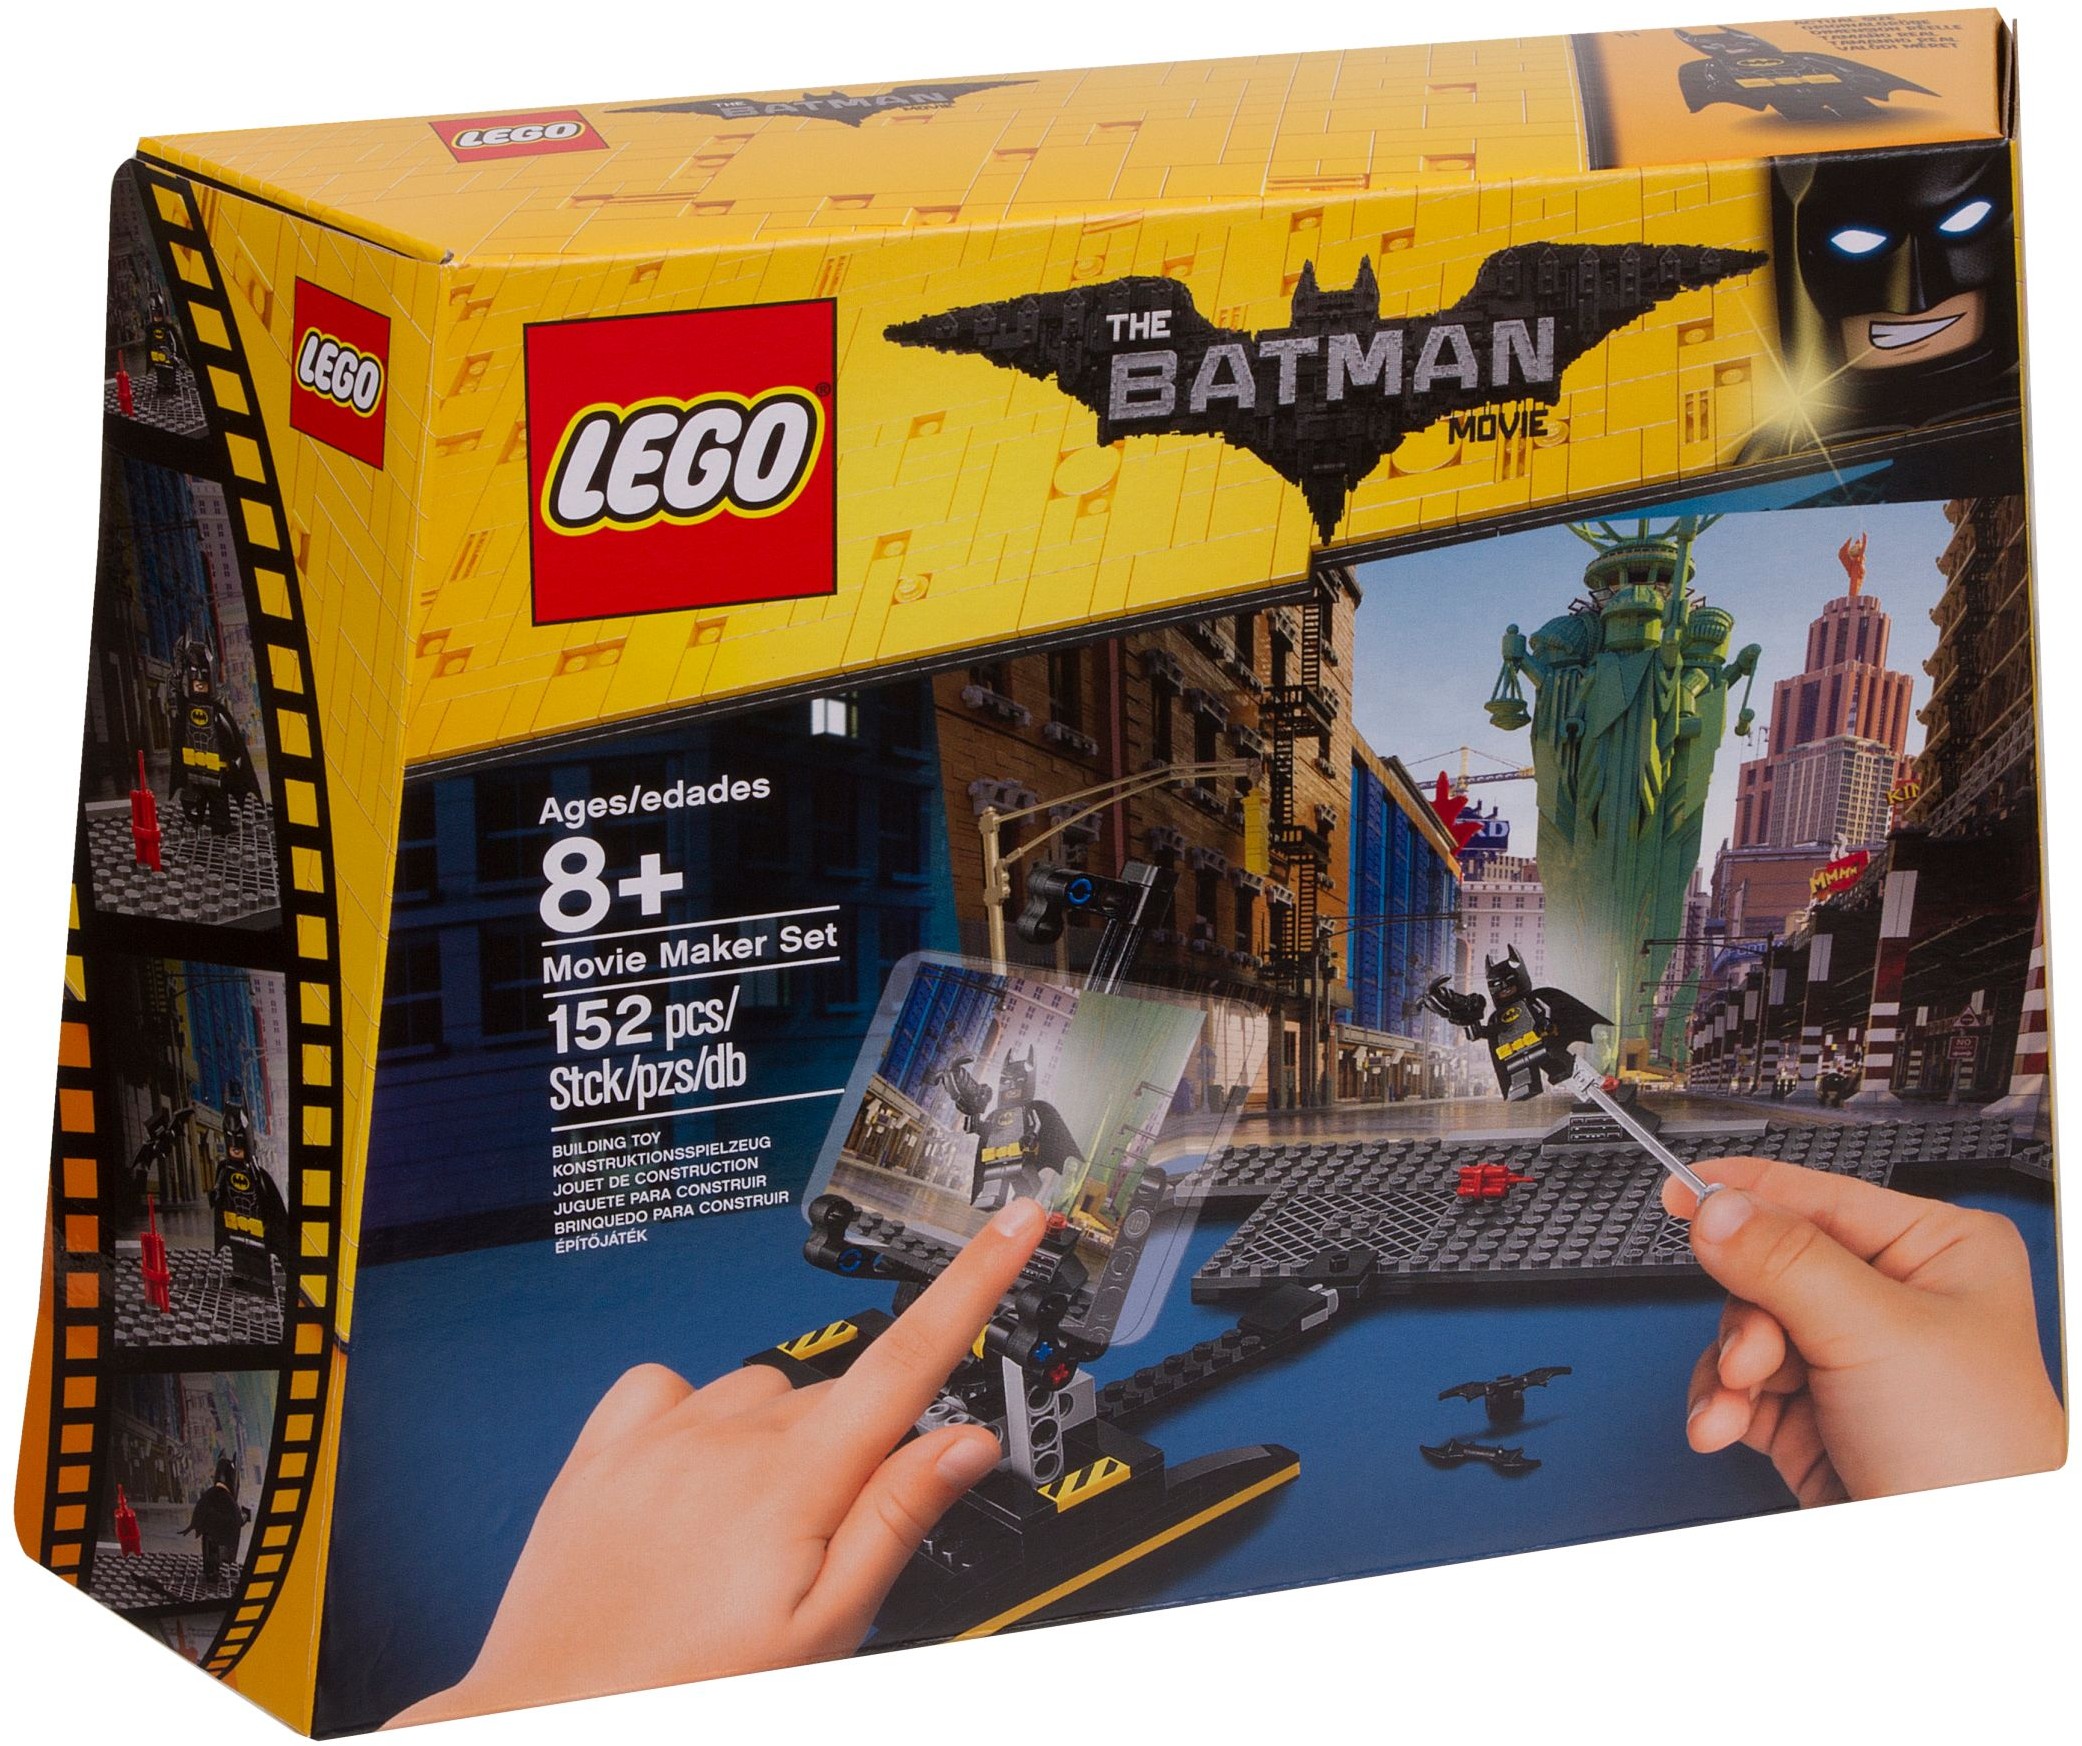 More sets from The LEGO Batman Movie revealed [News] - The Brothers Brick